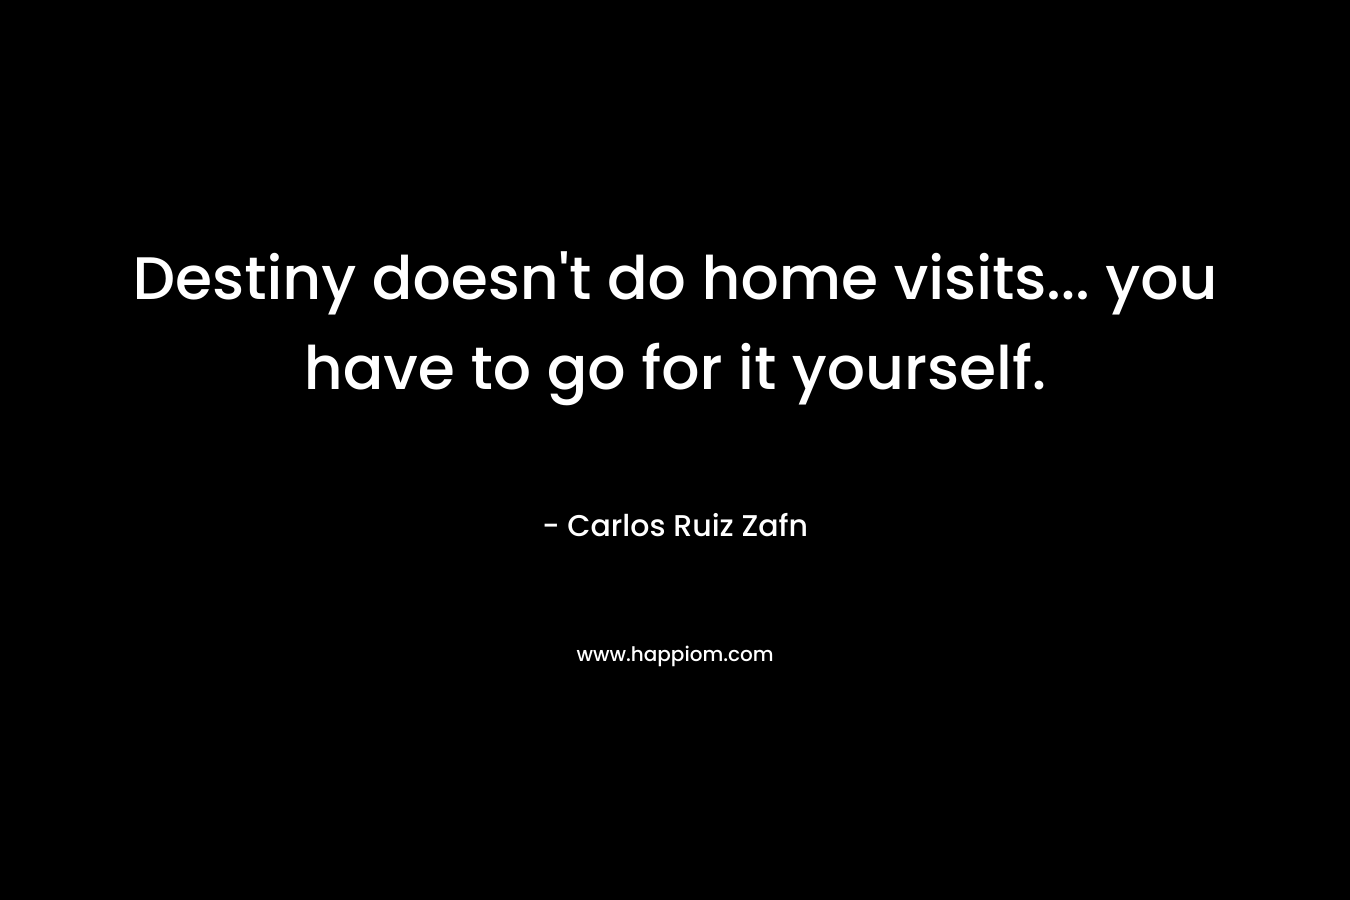 Destiny doesn’t do home visits… you have to go for it yourself. – Carlos Ruiz Zafn